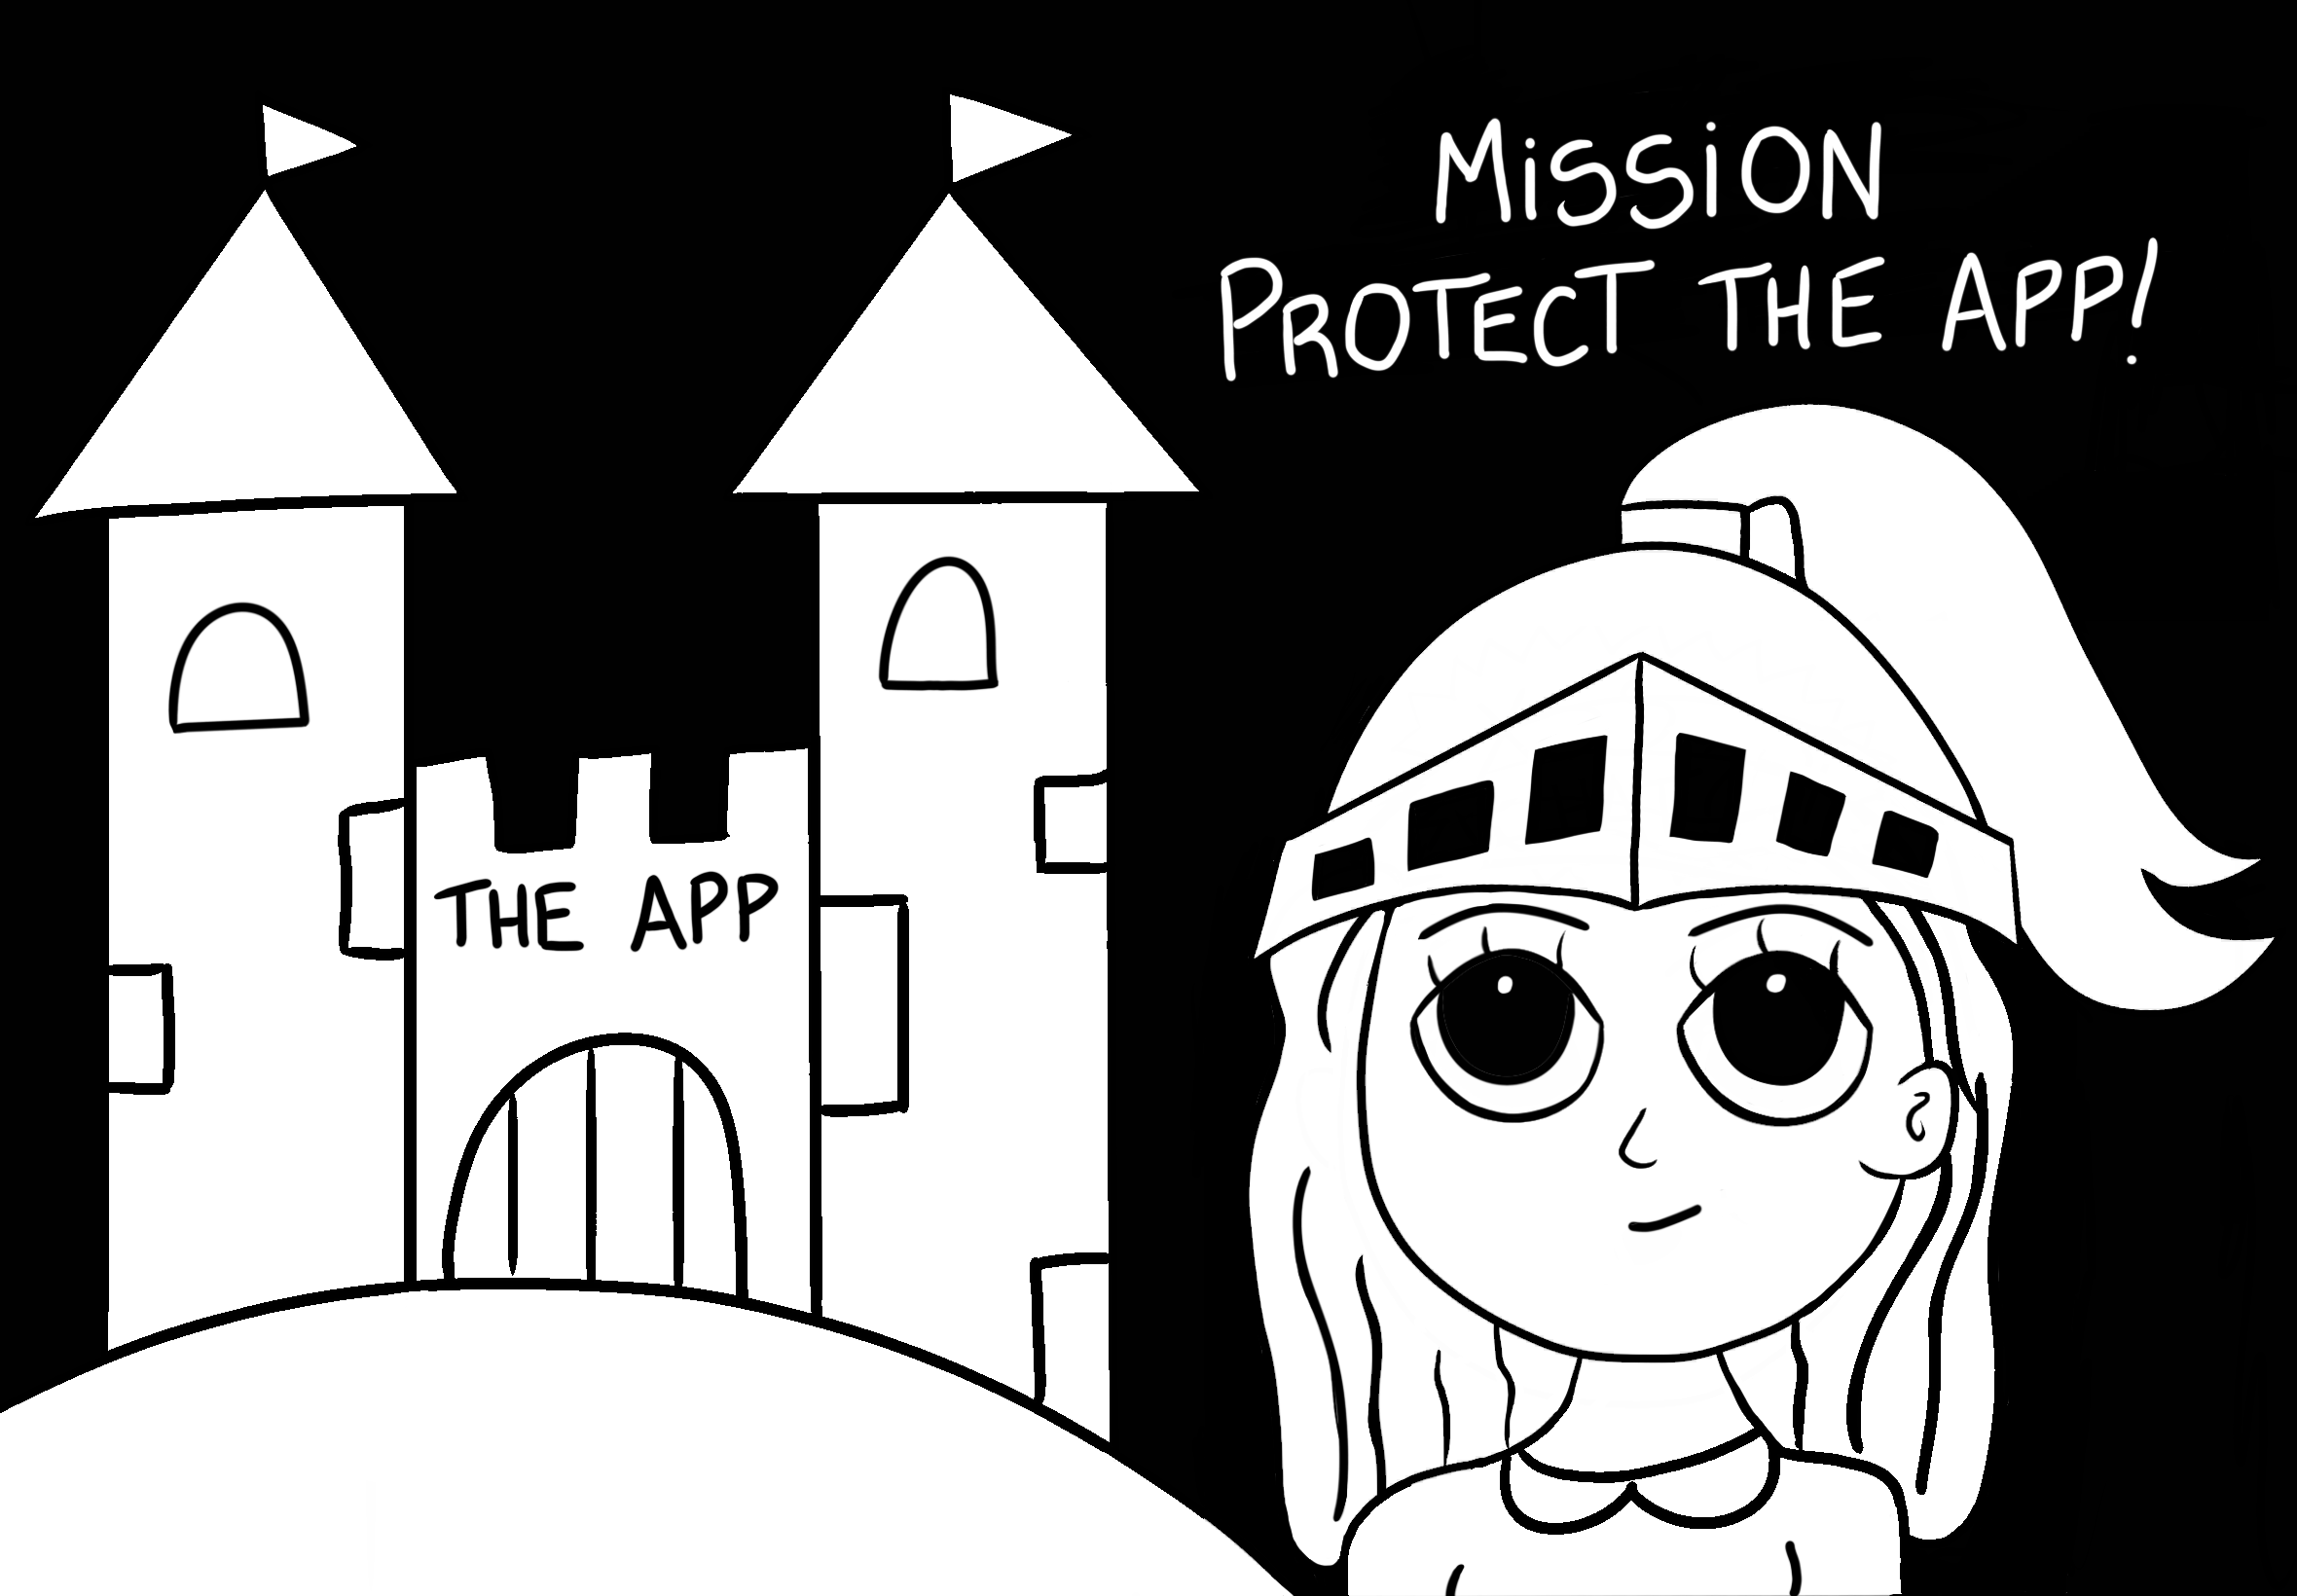 medieval themed illustration of a woman warrior wearing a helmet in front of a castle named "the app", with the sentence "mission: protect the app!" 